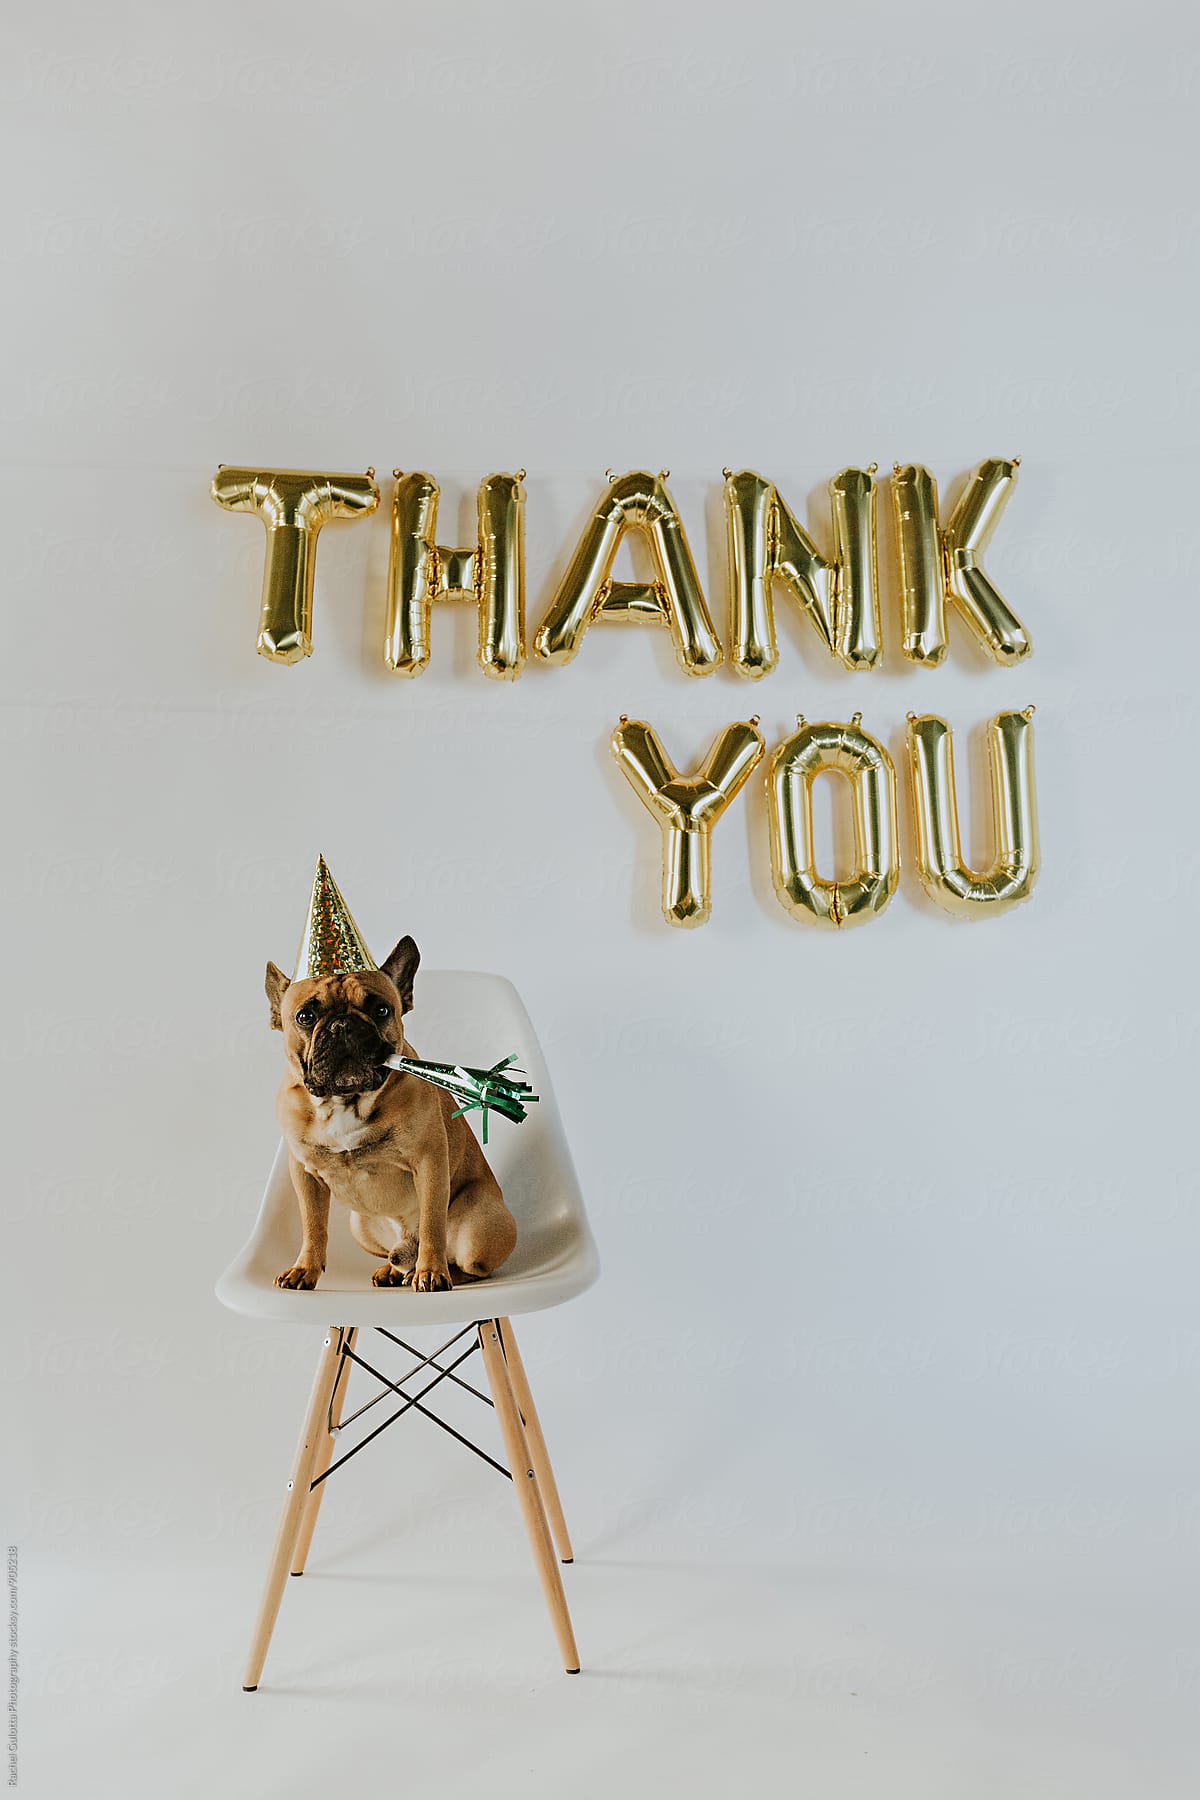 Gold Thank You Balloon Letters and French Bulldog Puppy Wearing a Party Hat